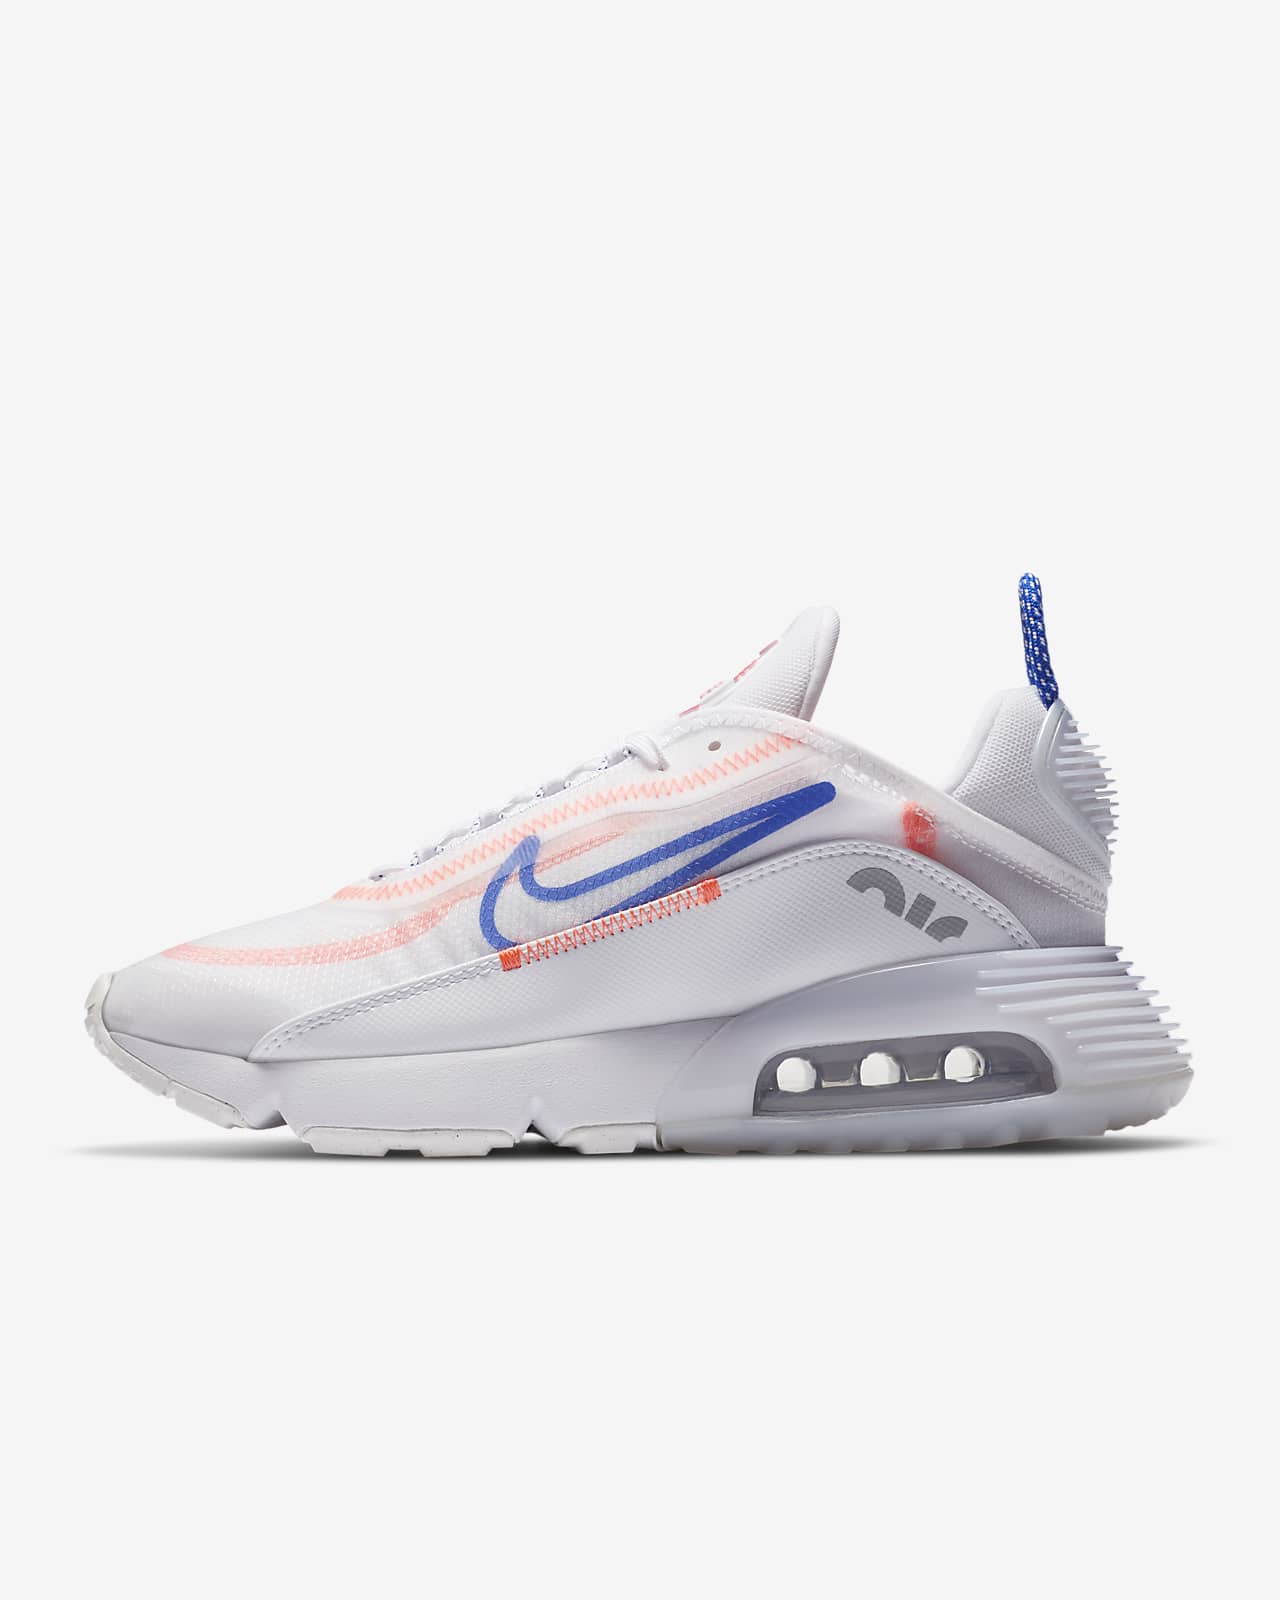 nike air max 2090 trainers in white and blue